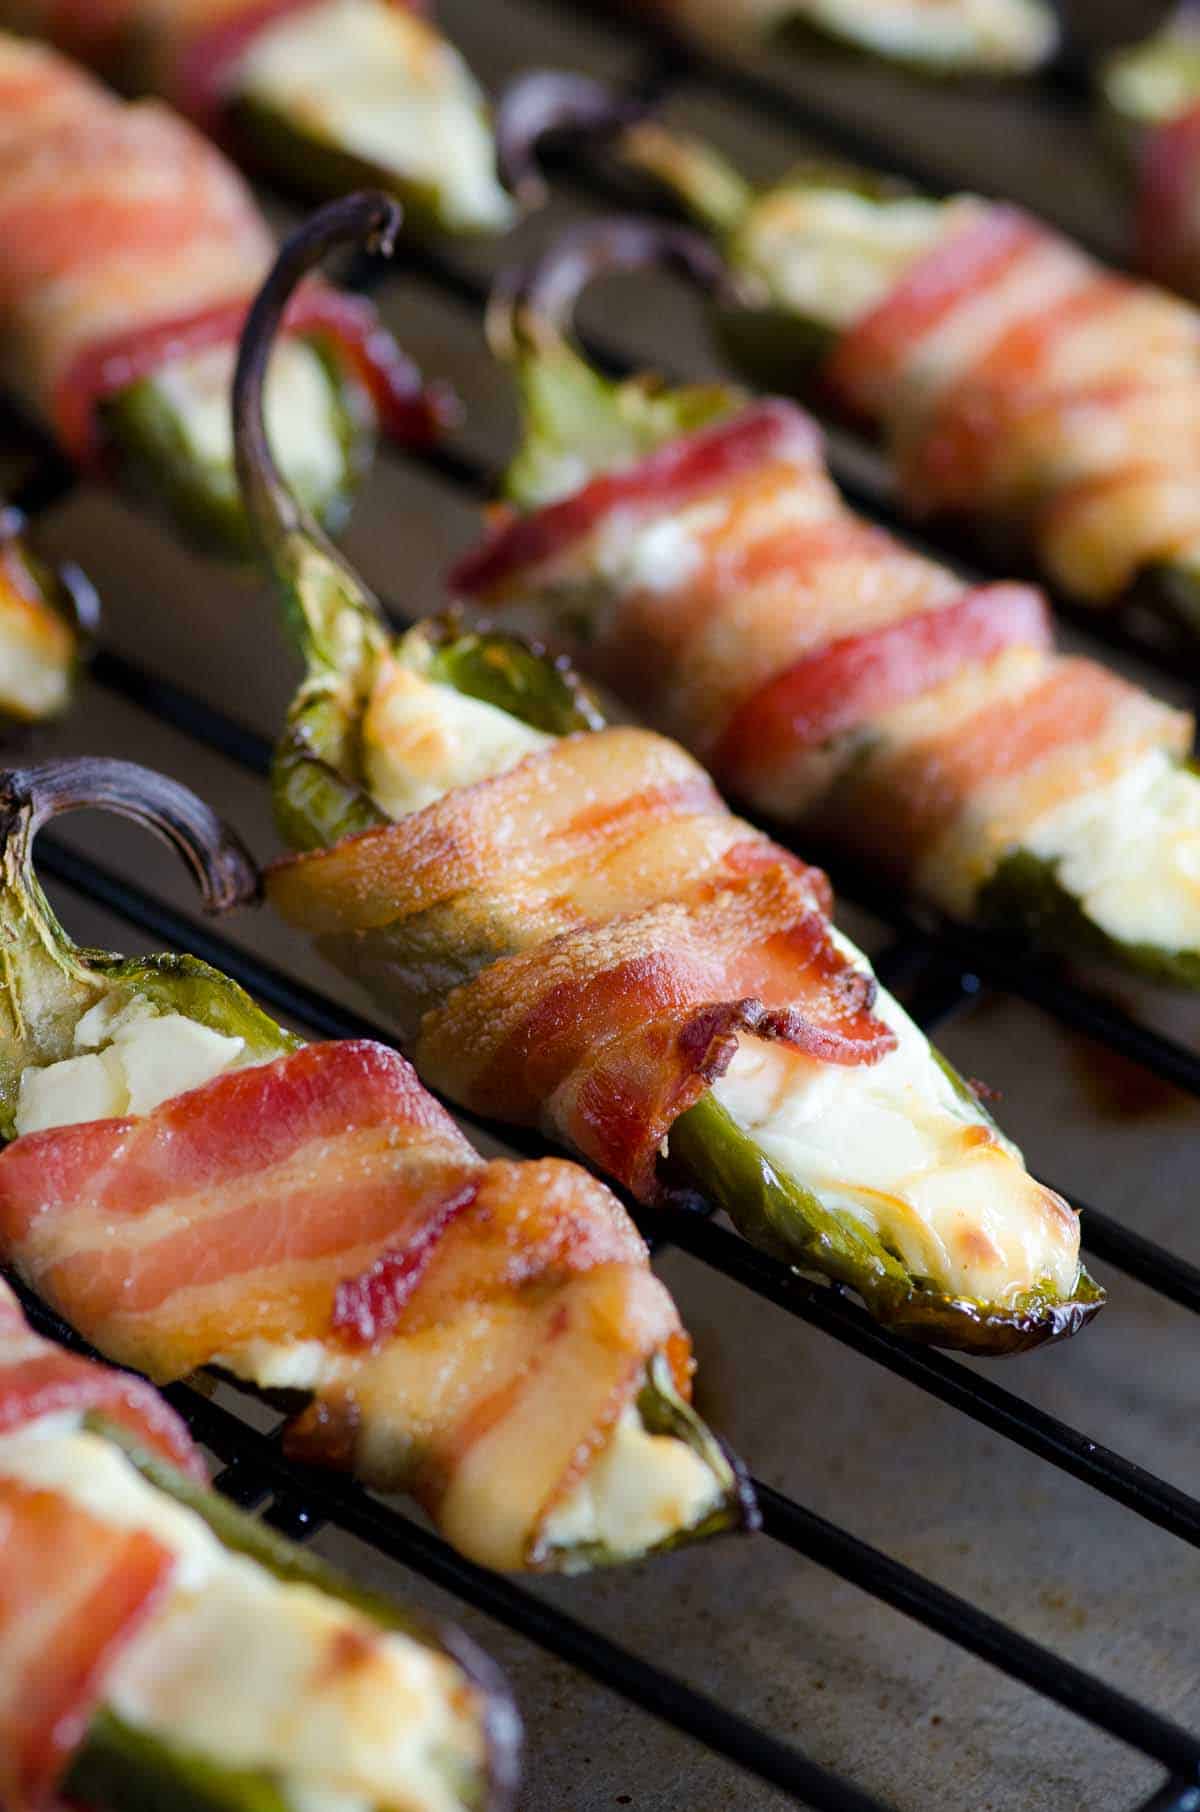 bacon wrapped jalapeno stuffed with cream cheese